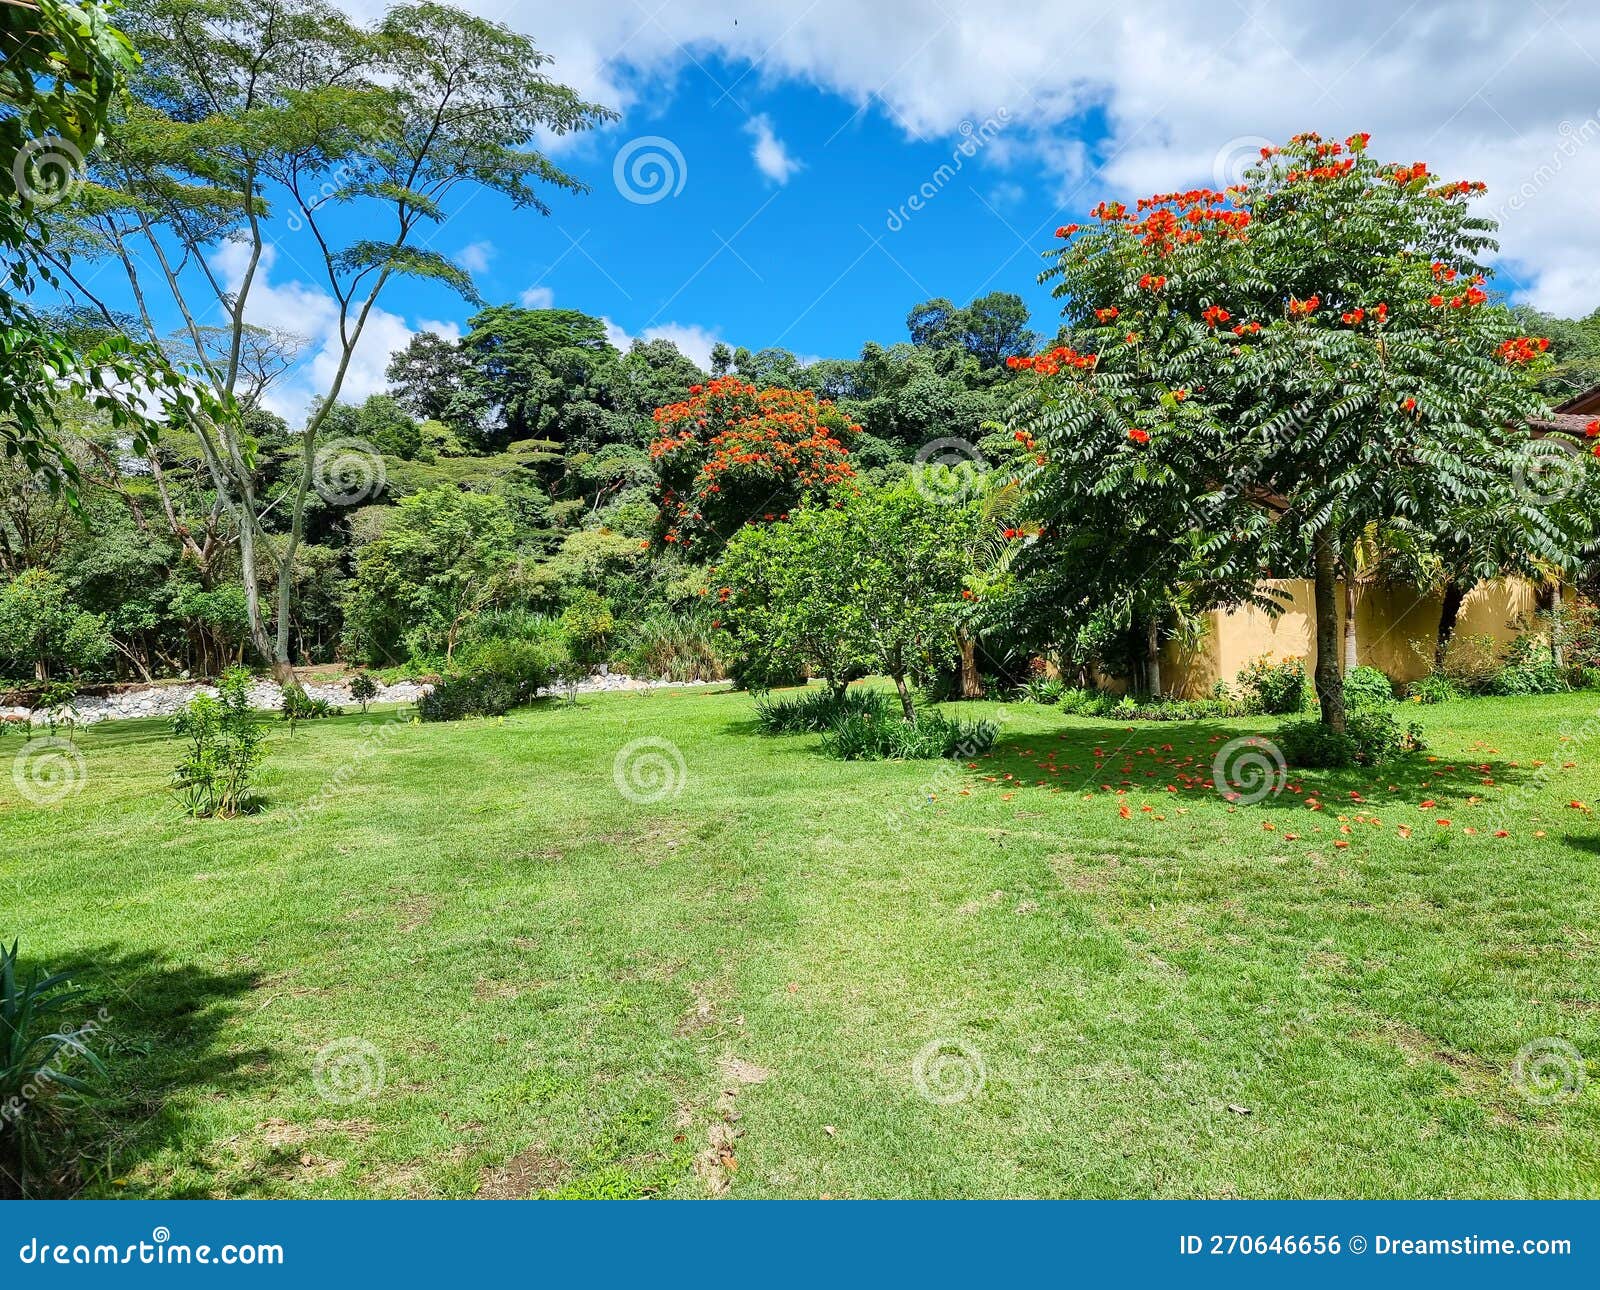 Panama, Boquete, Guayacan Tree with Red Flowers Stock Photo - Image of ...